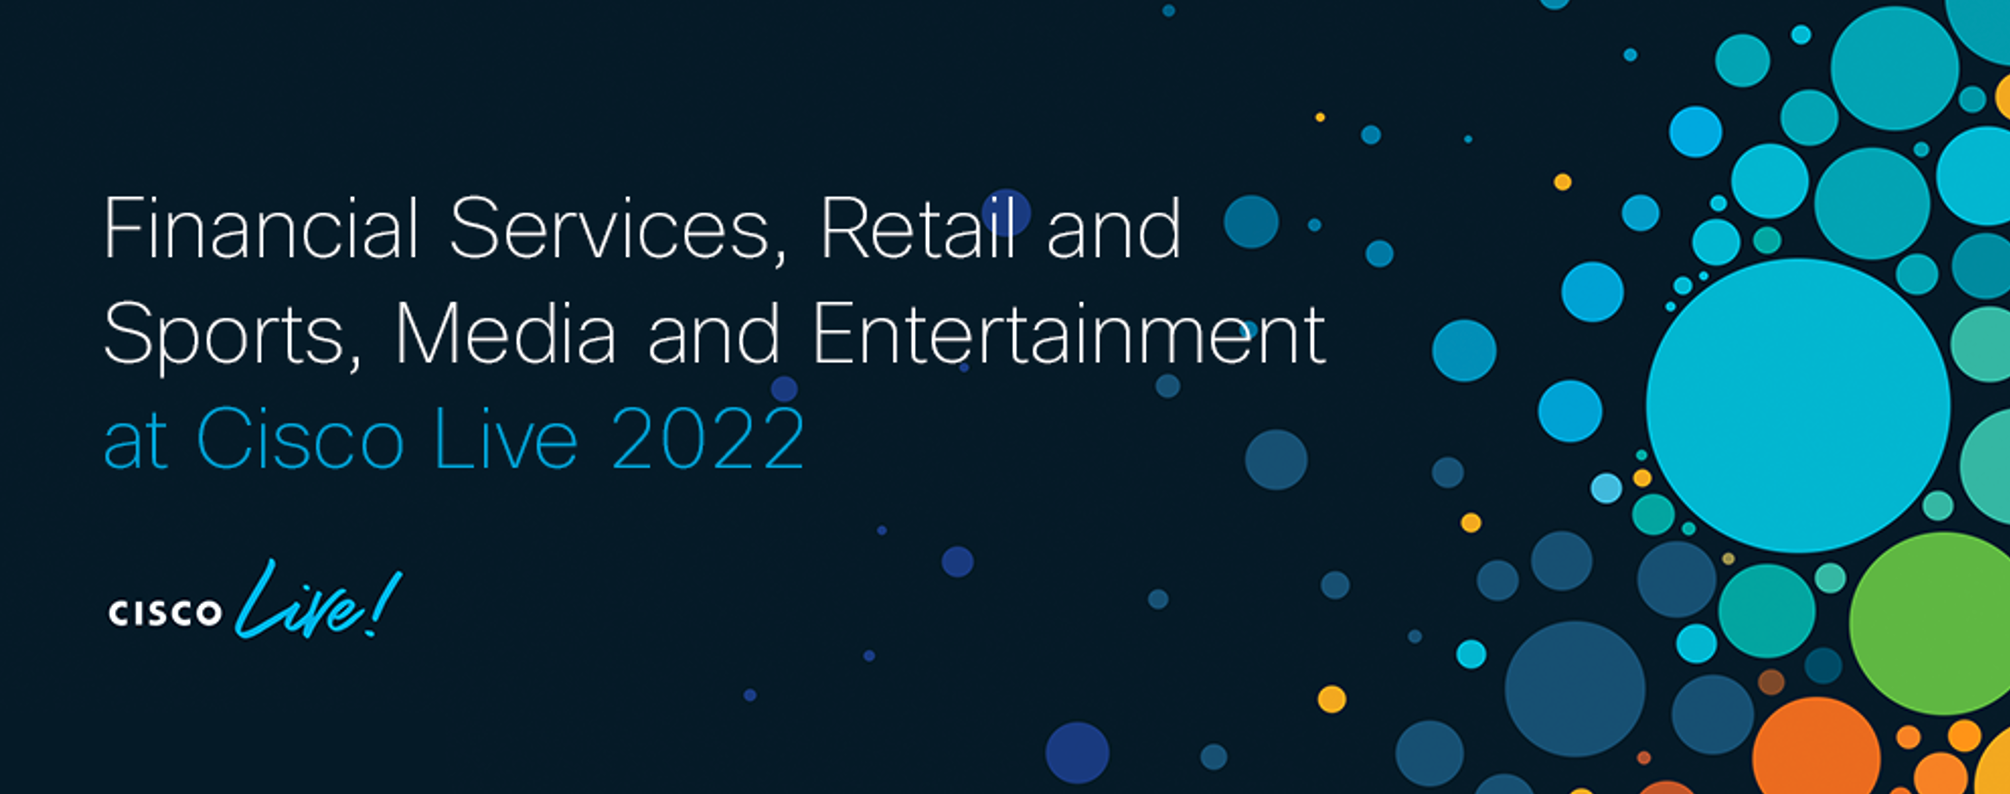 Financial services, retail and sports, media and entertainment at cisco live 2022